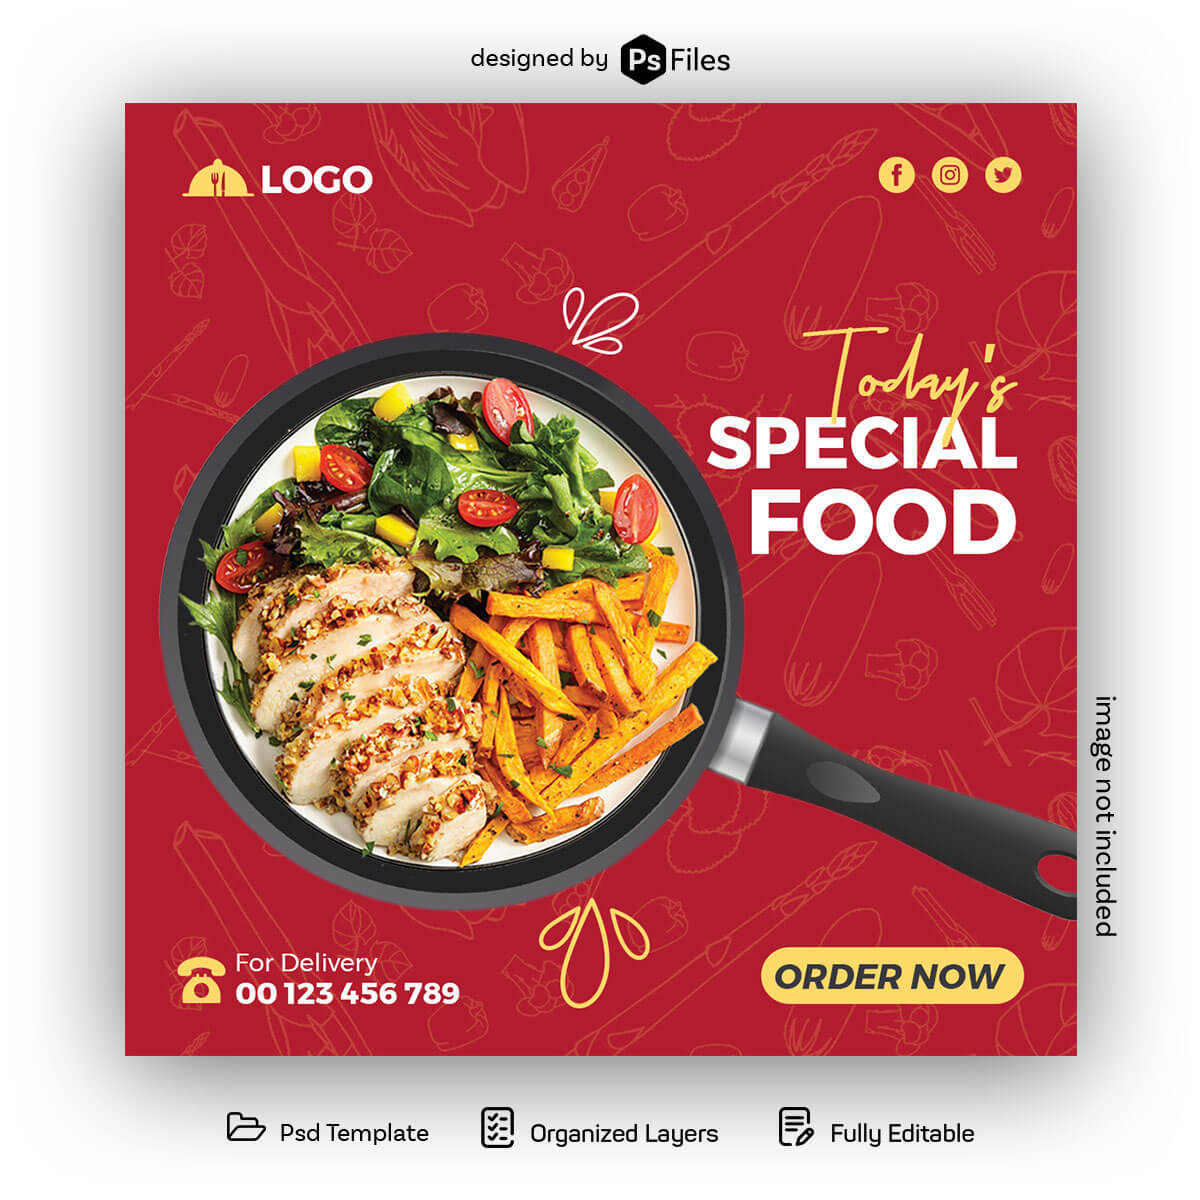 Free Special Food Offer Instagram Post Design PSD Template